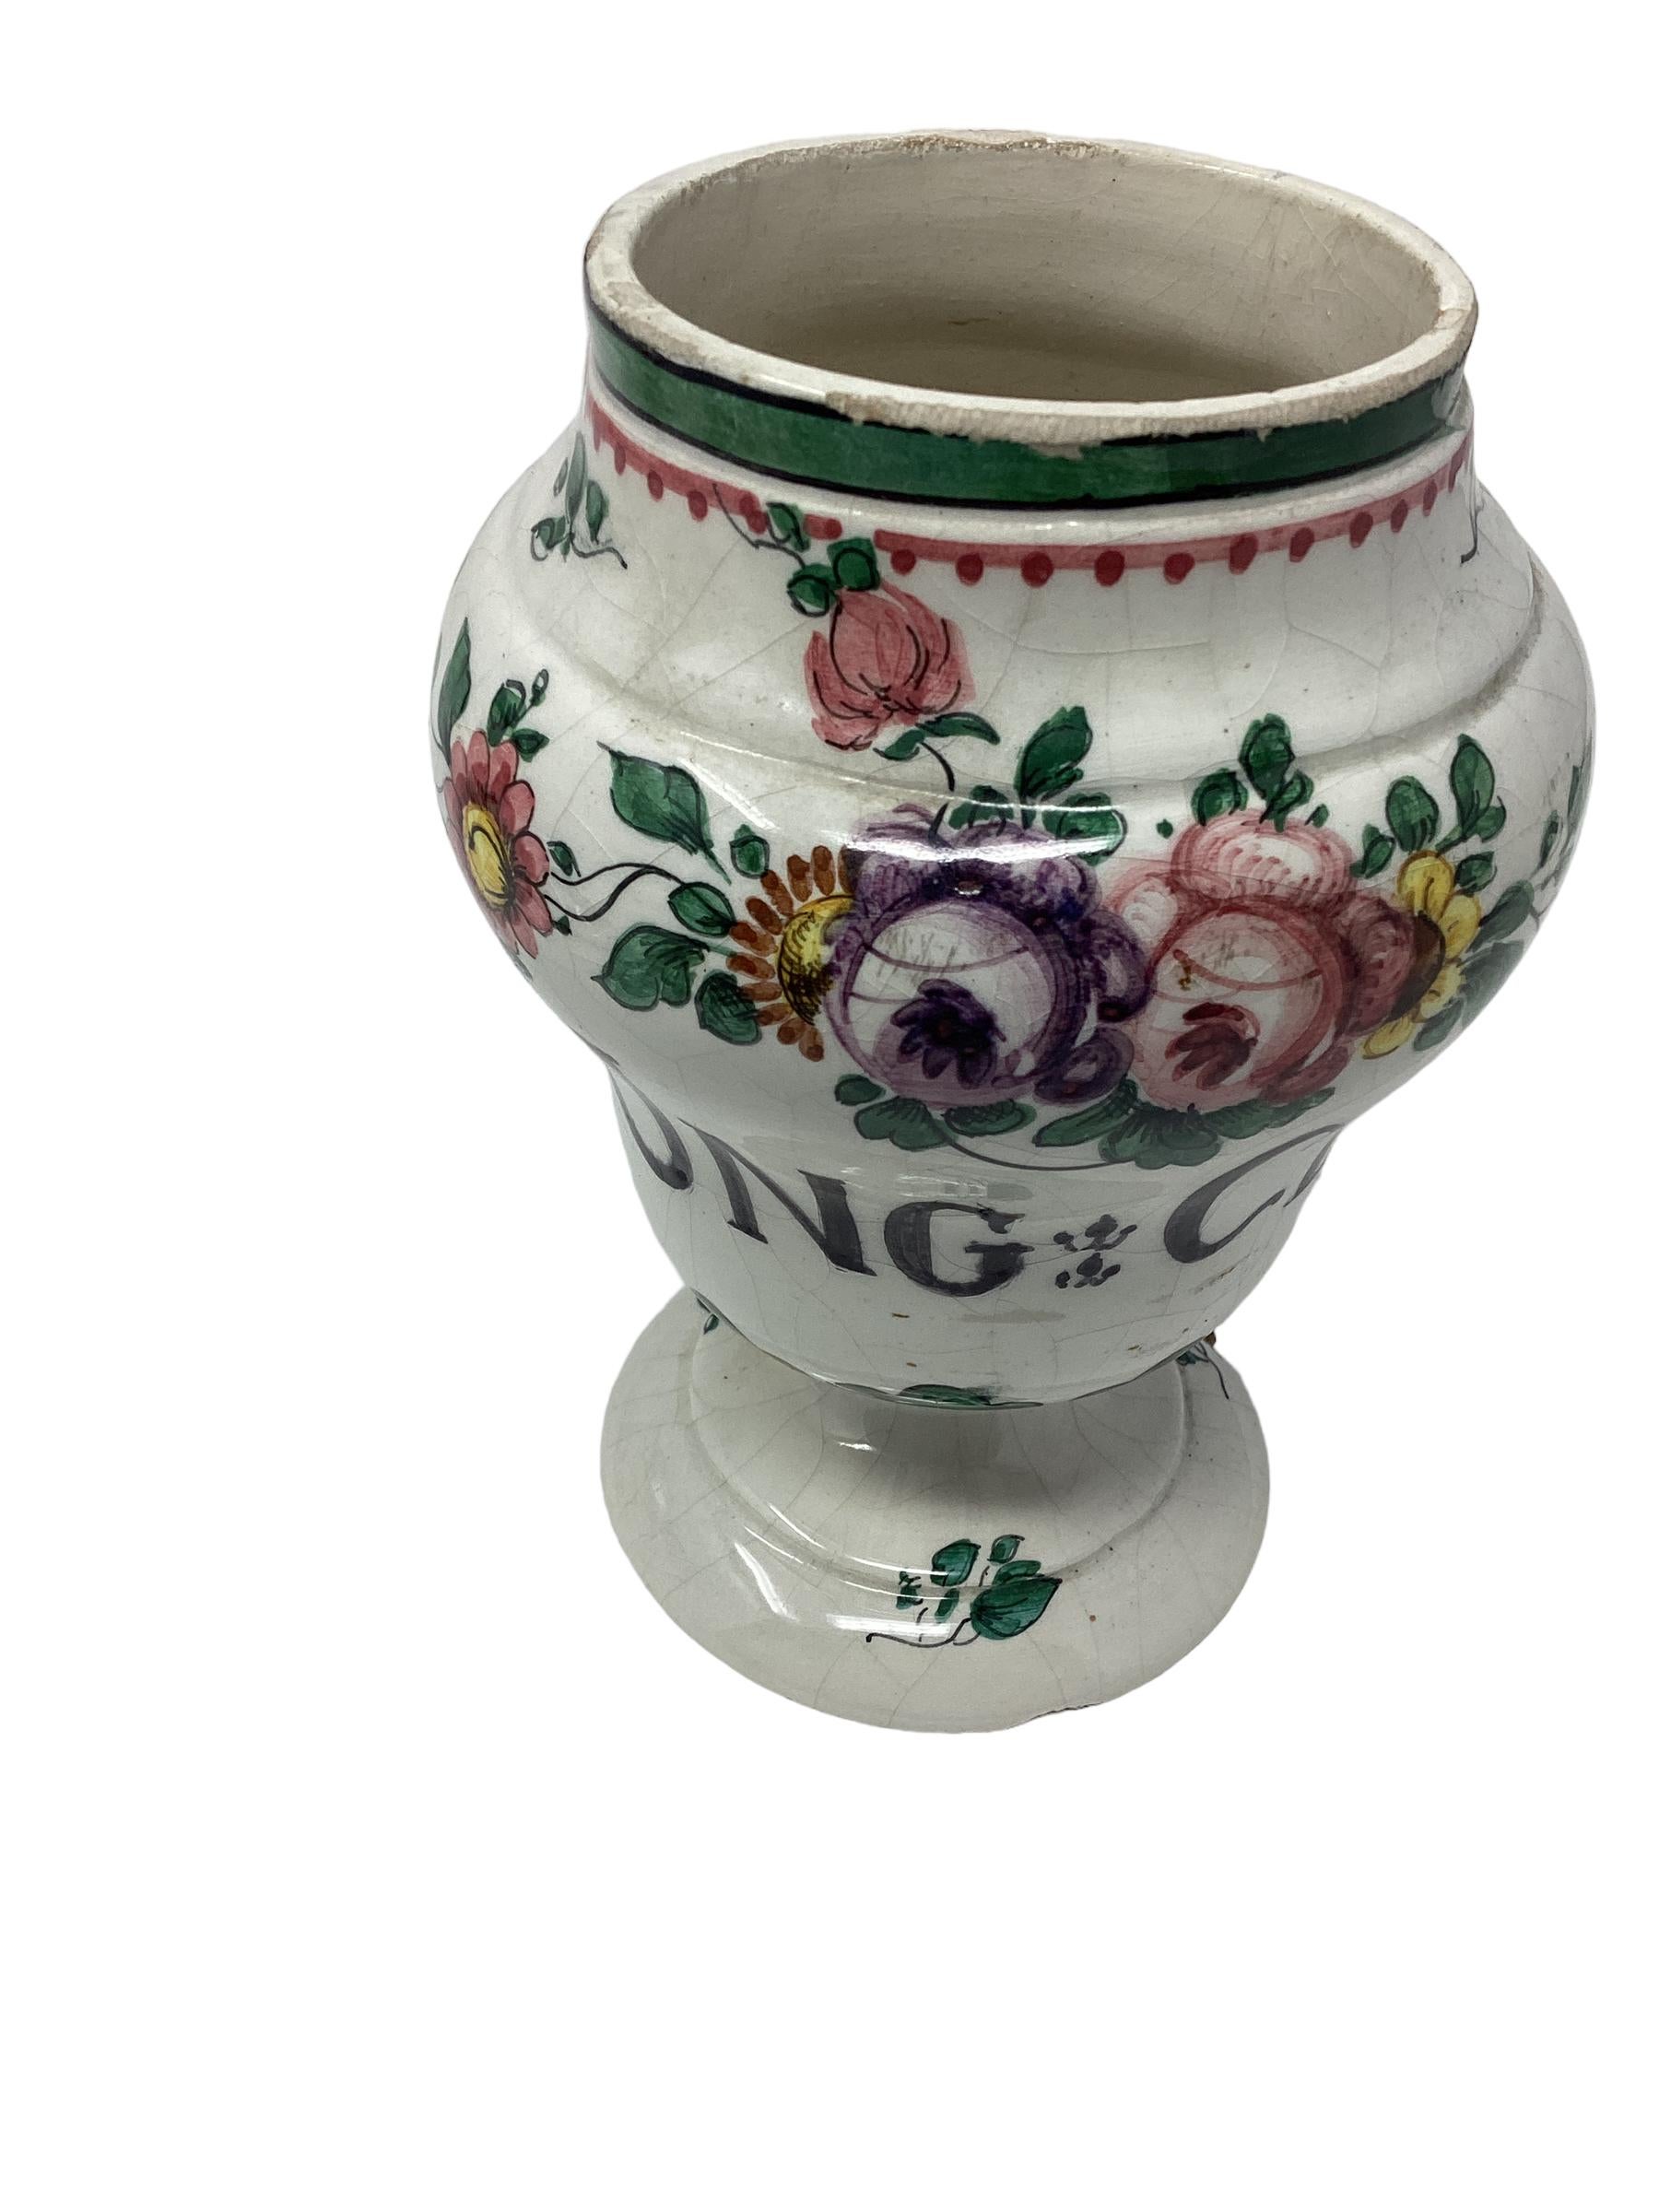 19th Century Italian Faience Floral Decorated Apothecary Jars For Sale 2